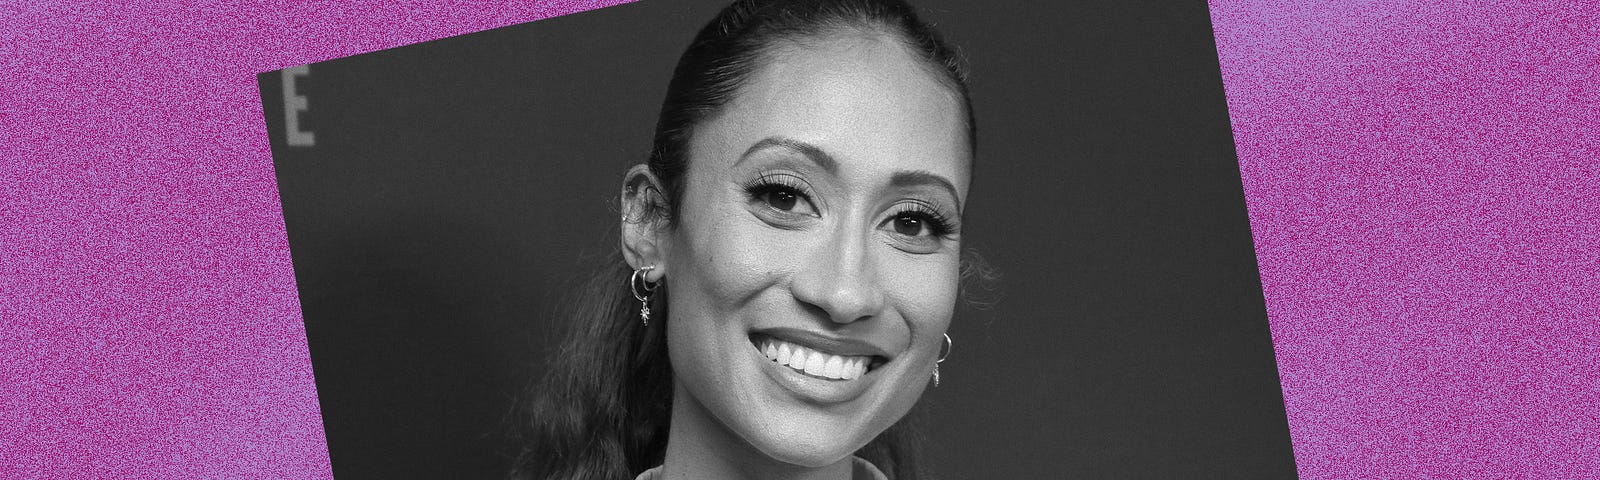 Black and white photo of Elaine Welteroth against a violet background.